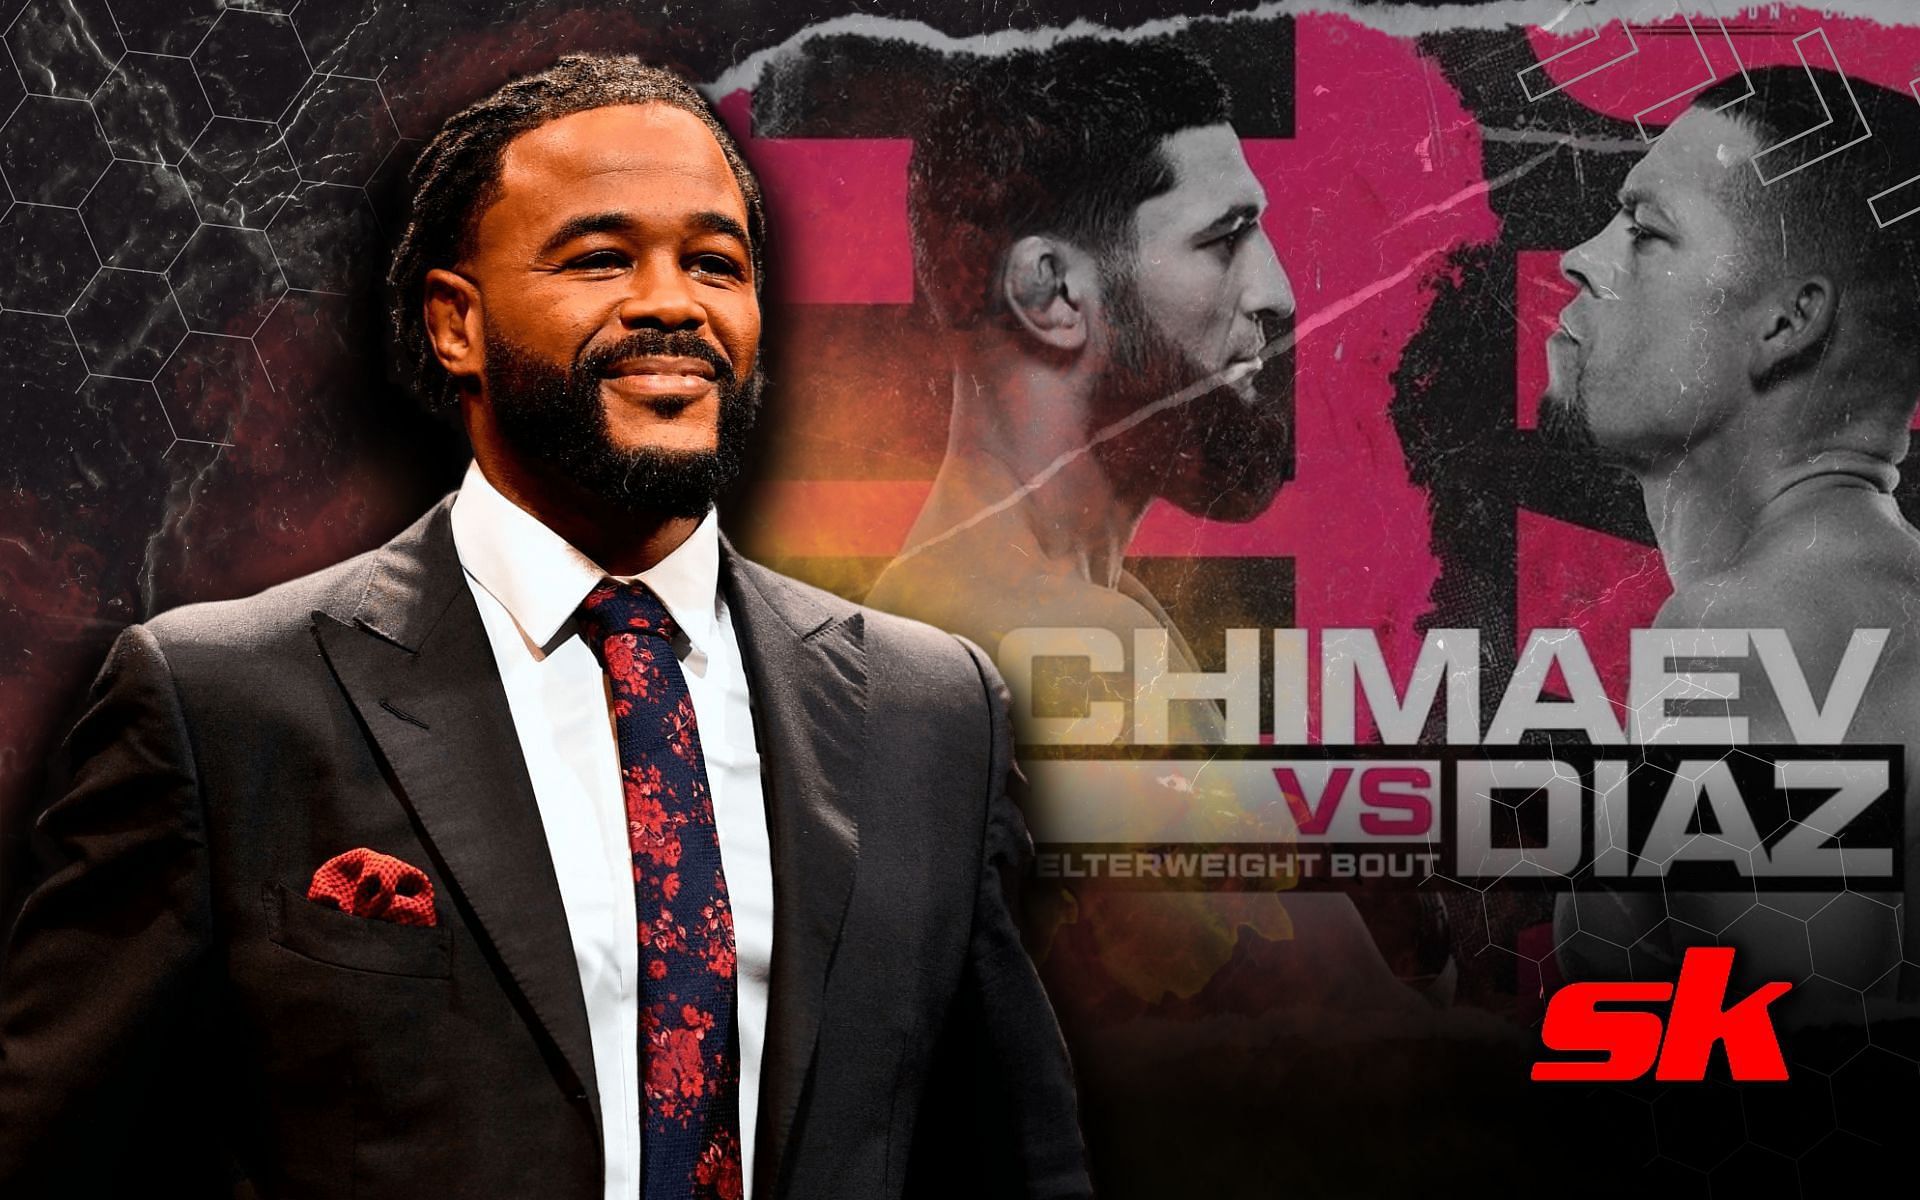 Rashad Evans on why Khamzat Chimaev may bring out the best in Diaz. [Image Credits: @khamzat_chimaev on Instagram; Getty Images]